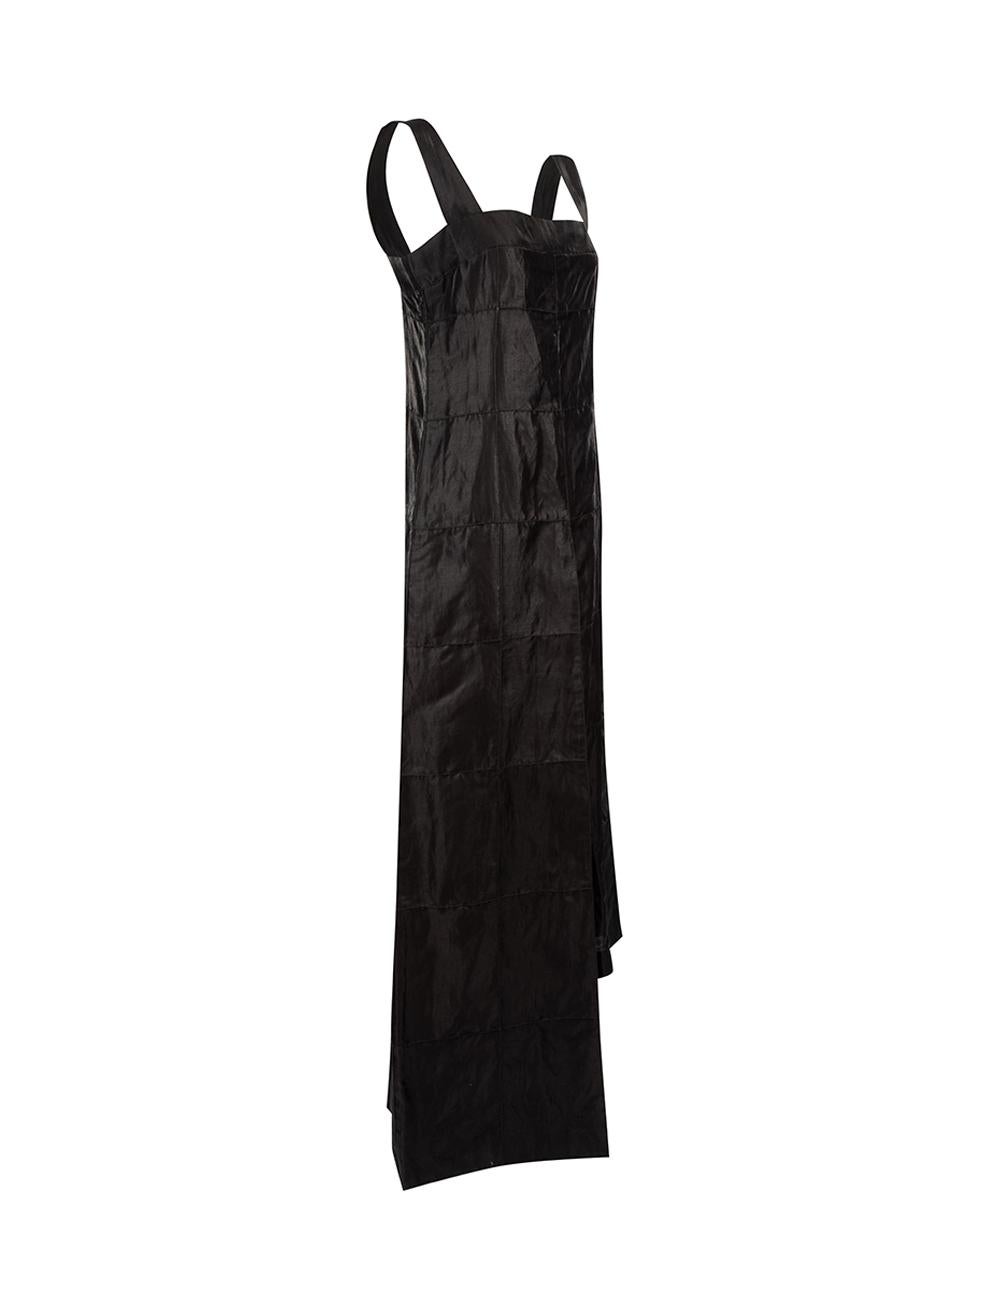 CONDITION is Very good. Hardly any visible wear to dress is evident however size/composition label has been partially cut on this used Chanel designer resale item.



Details


1999

Black

Silk

Midi dress

Sleeveless

Square neck

Panelled